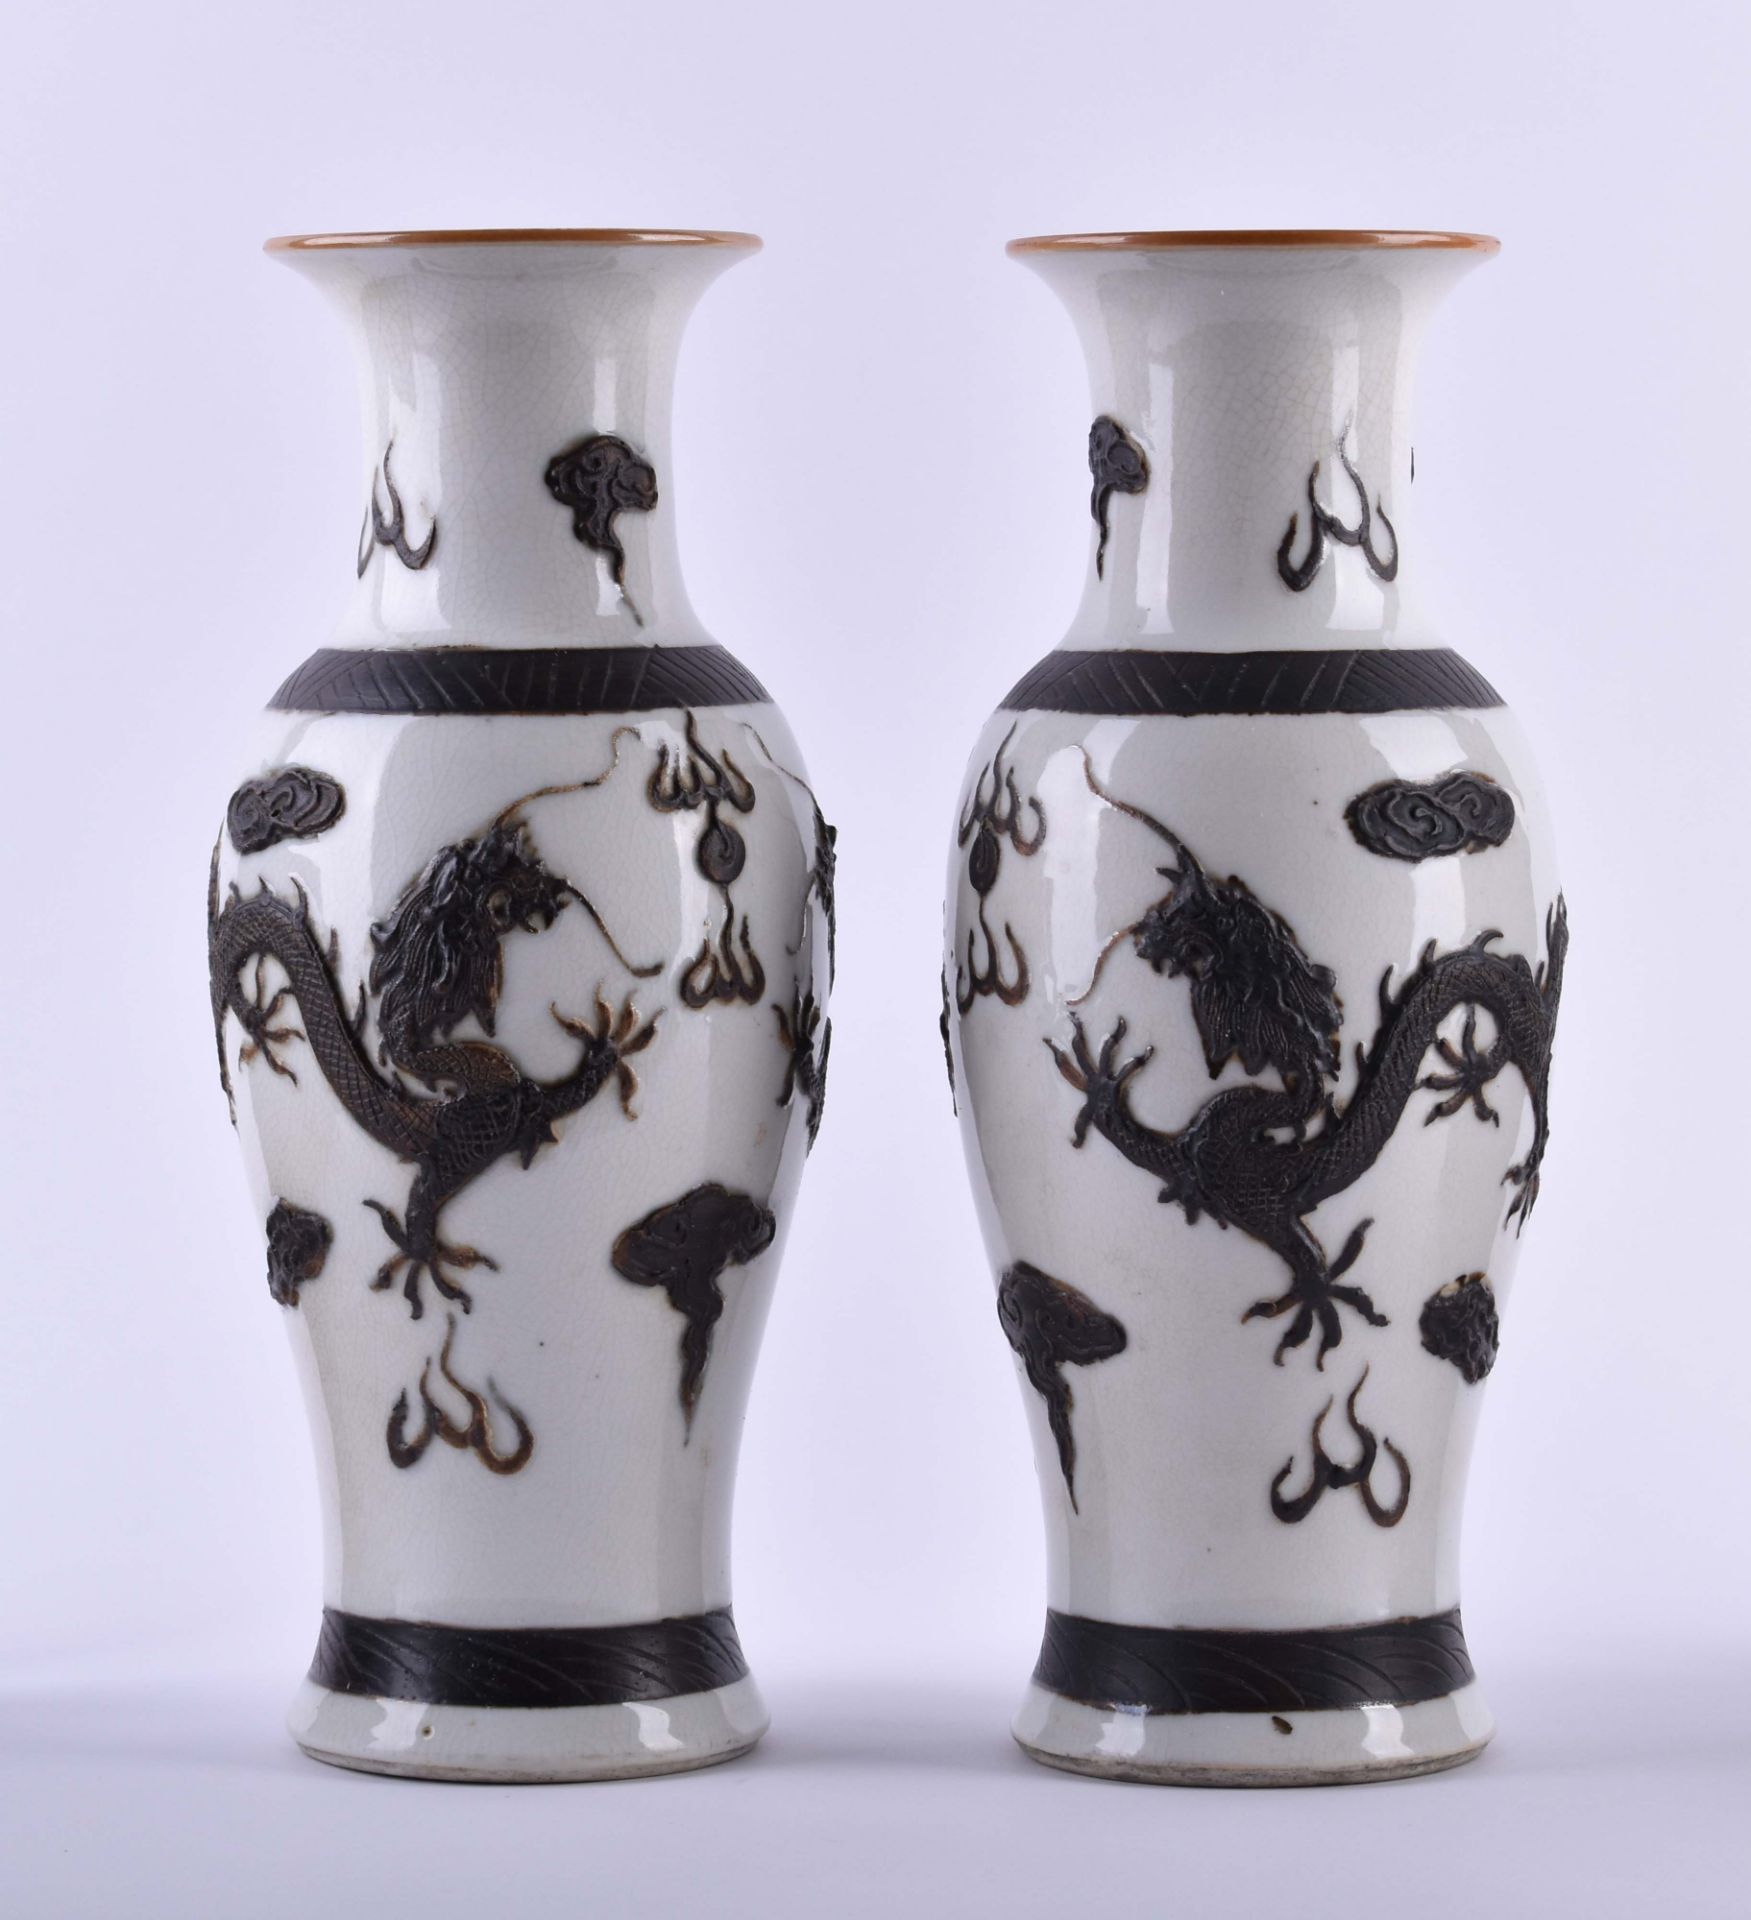  Pair of vases China Qing dynasty